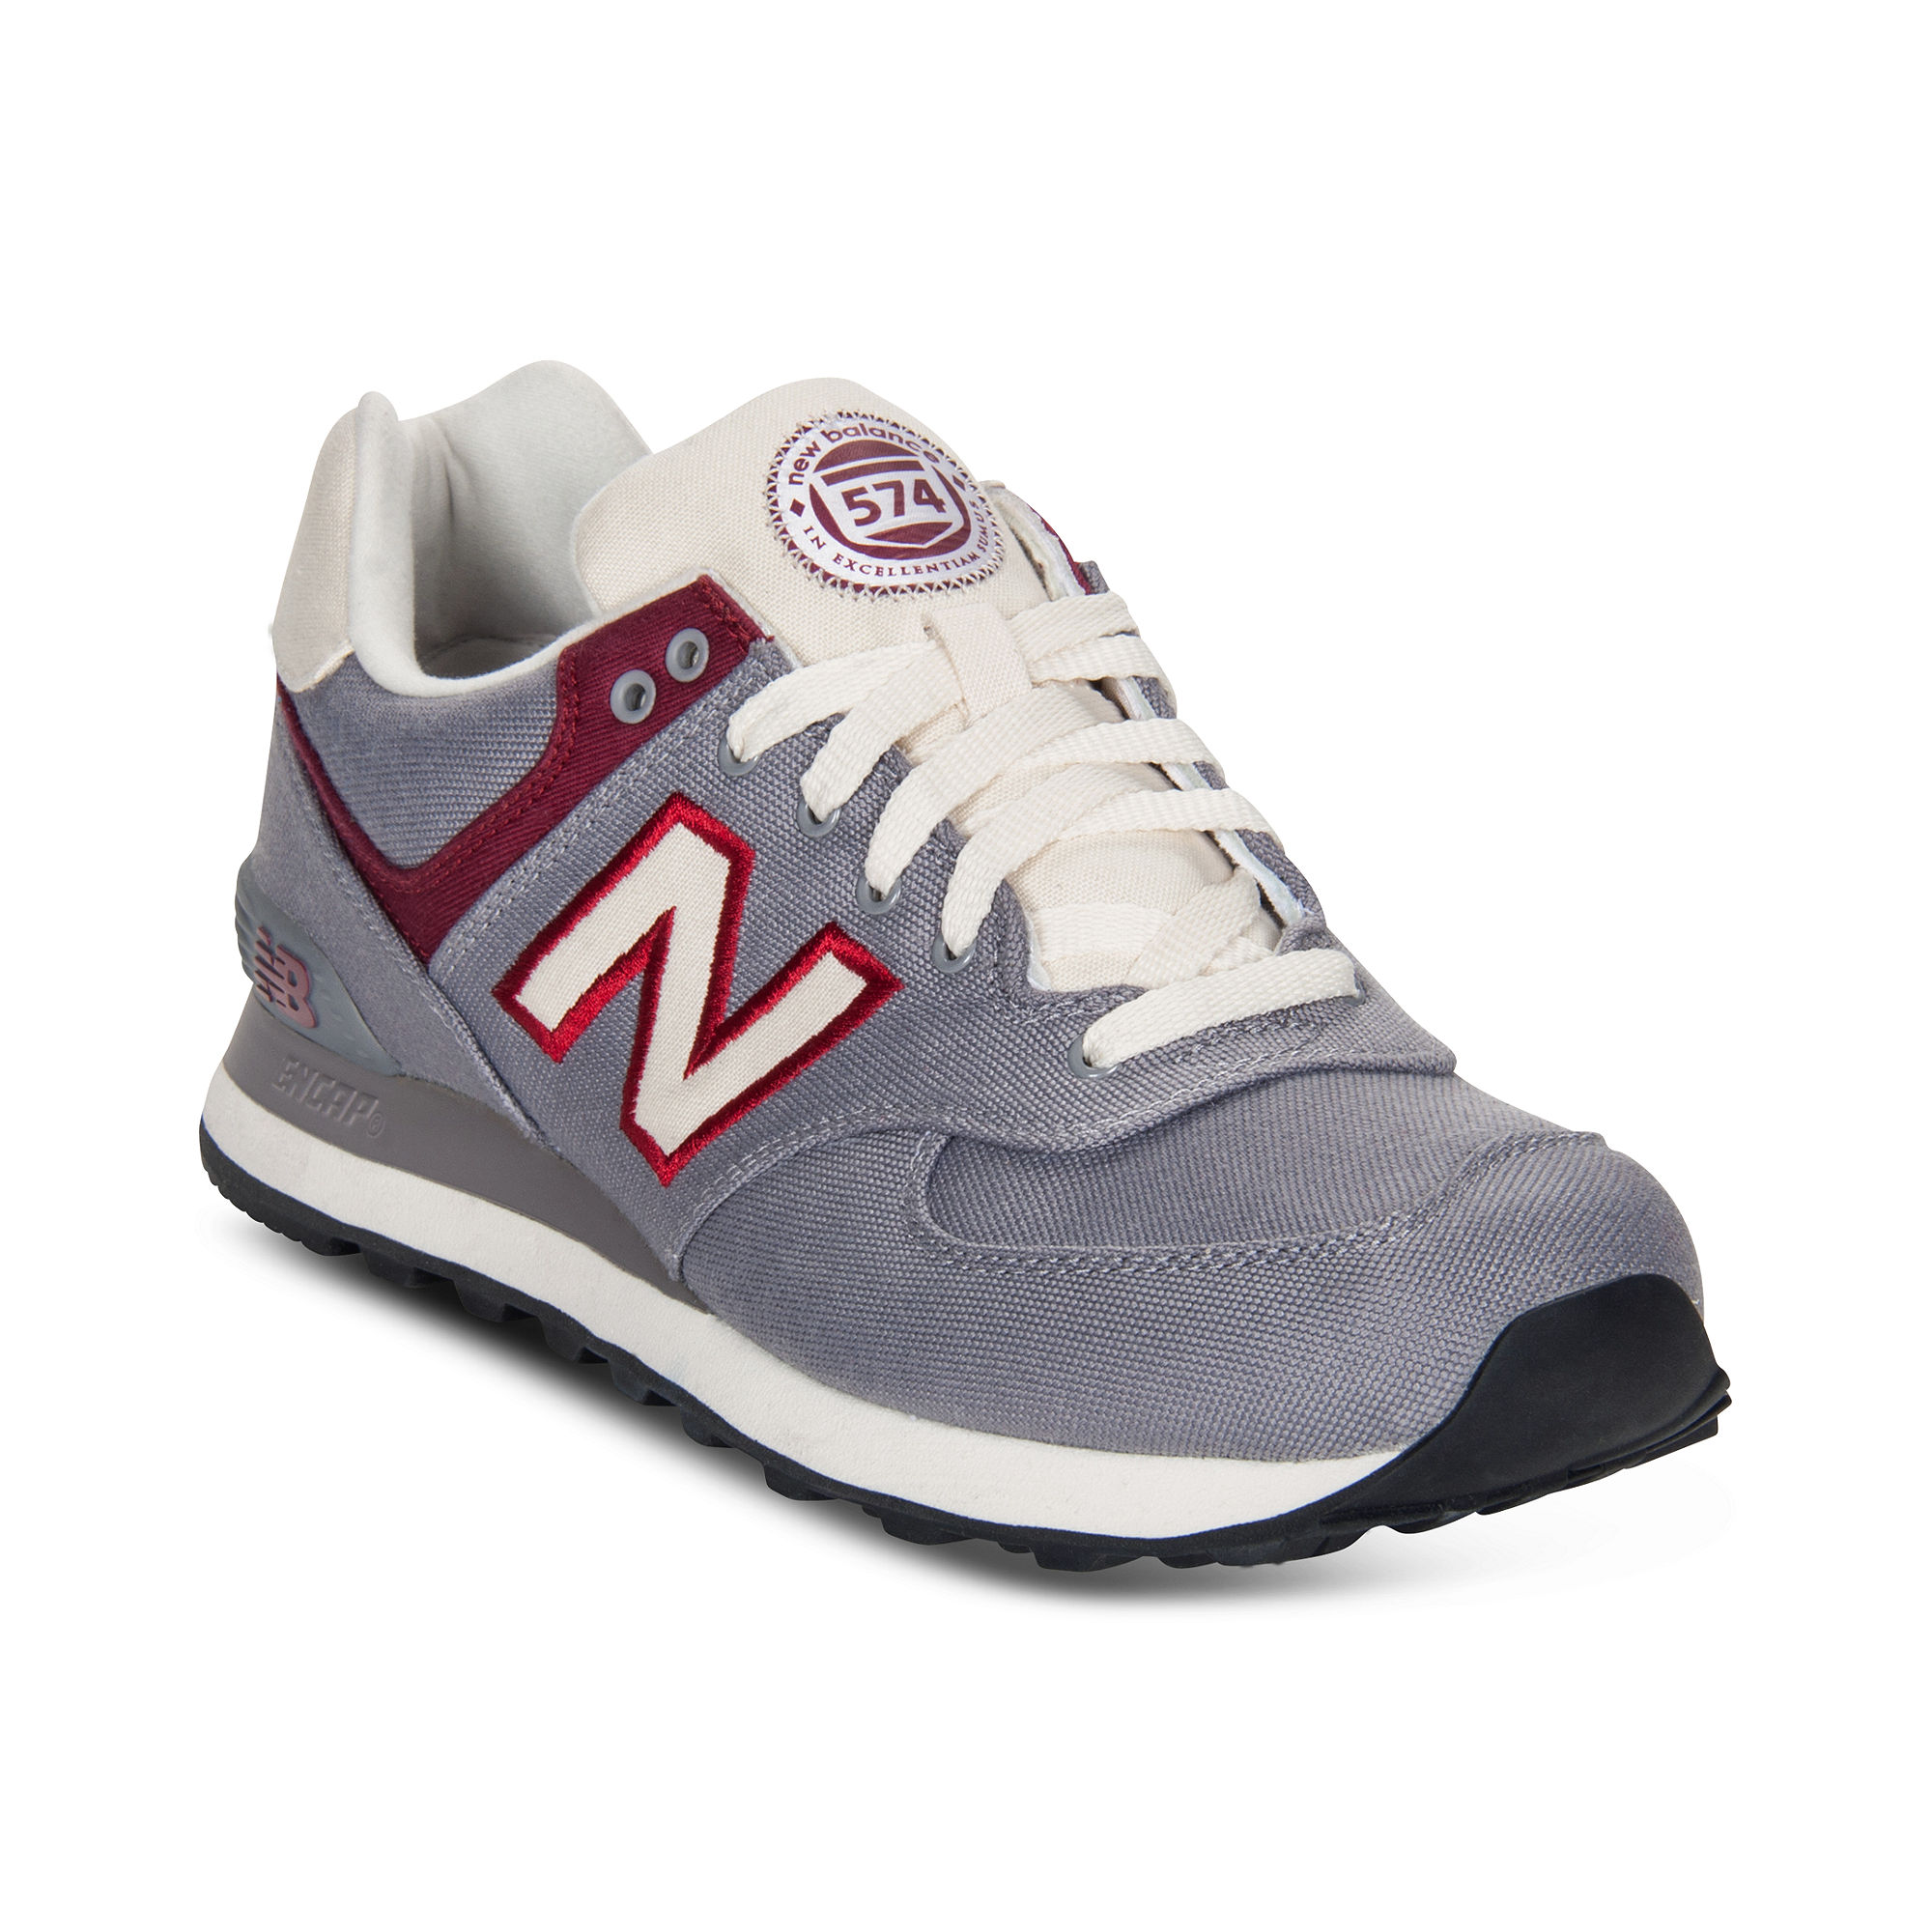 Lyst - New Balance 574 Sneakers in Gray for Men